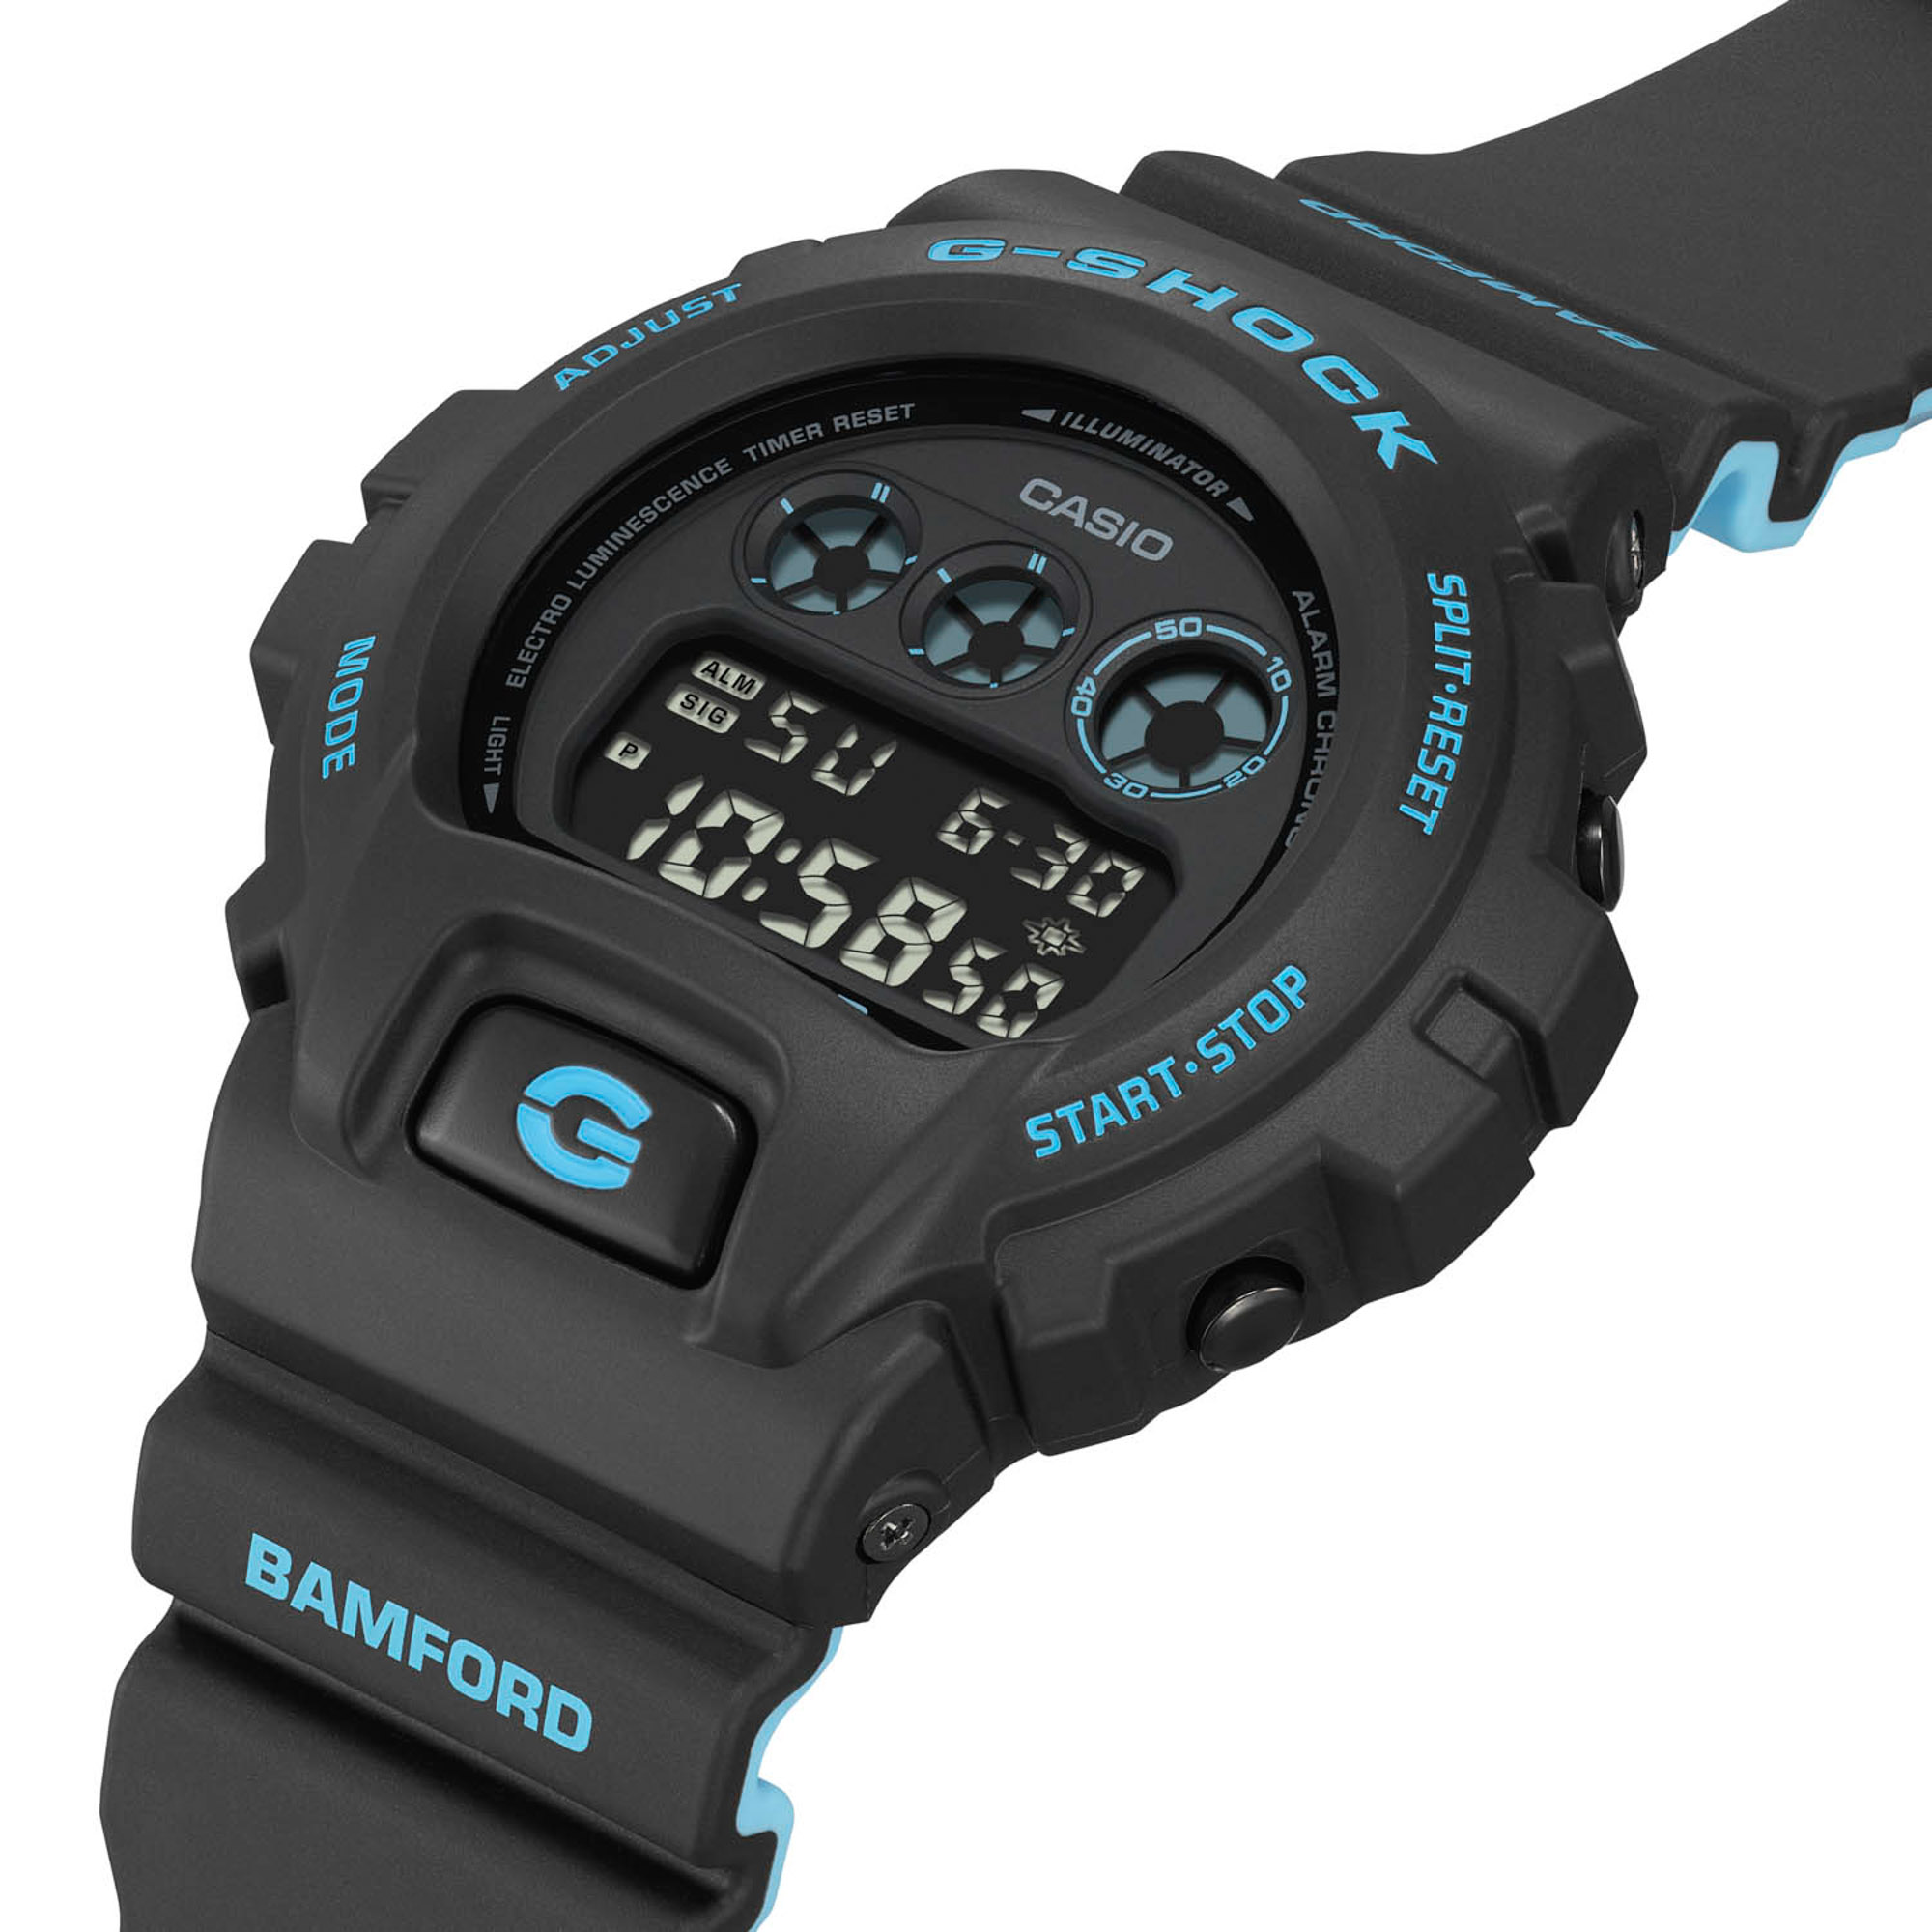 Bamford And G-Shock Unveil The DW-6900BWD-1ER Collaboration Watch